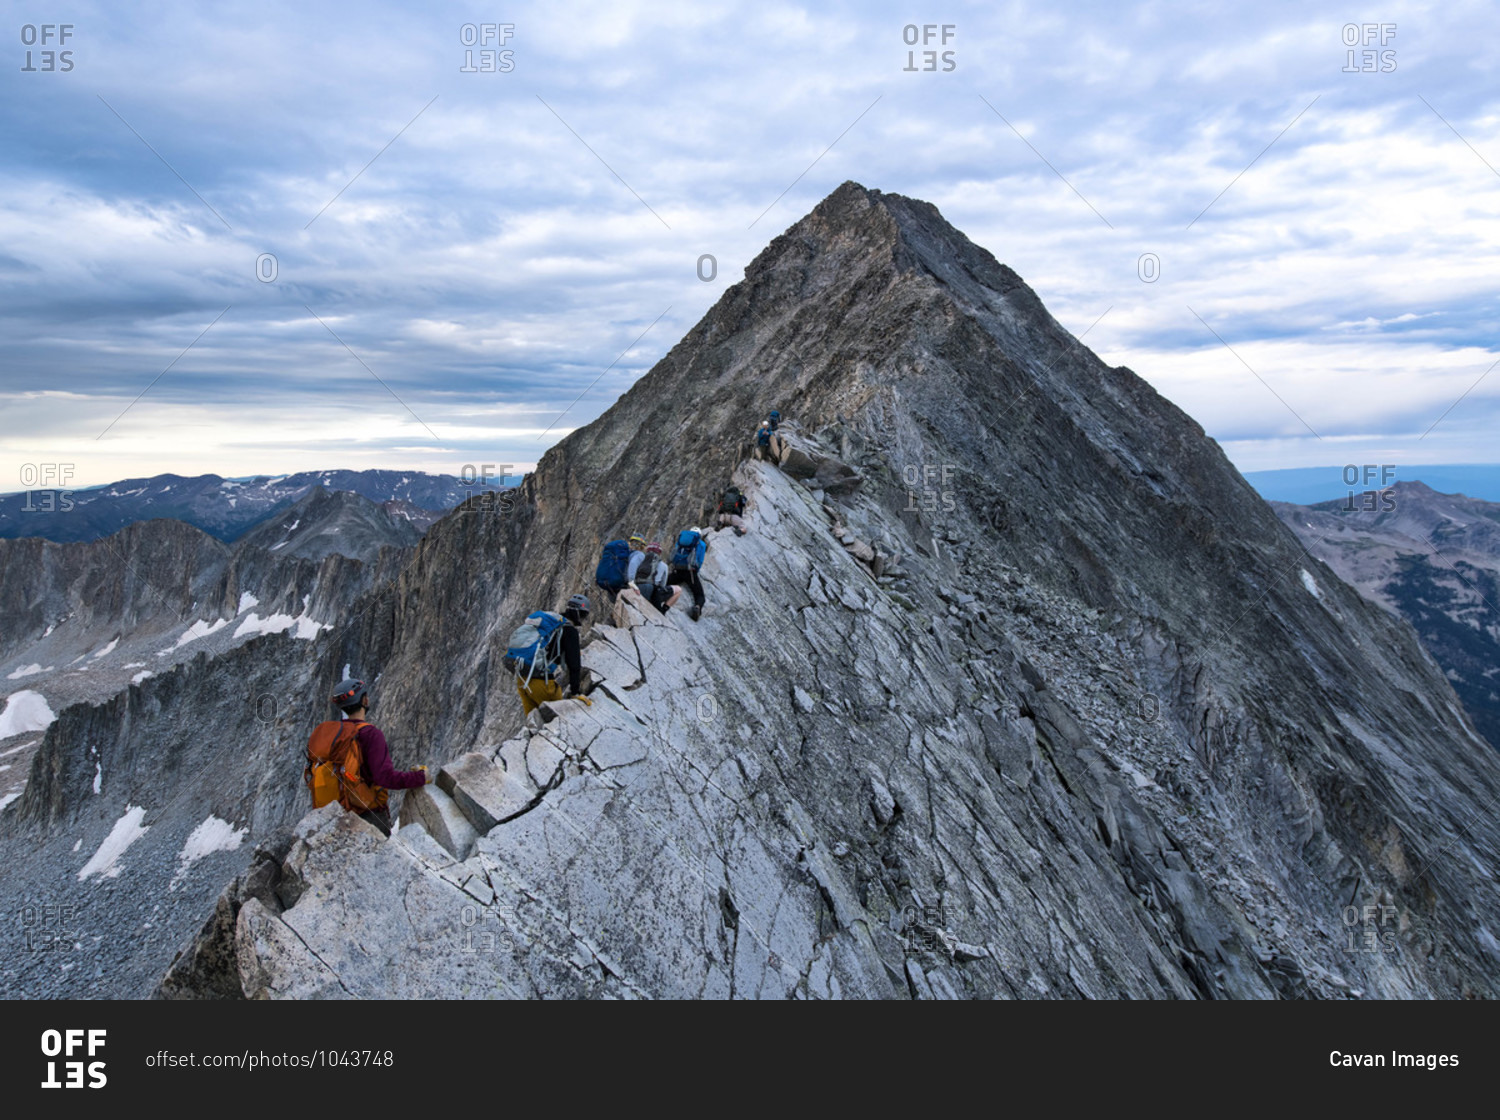 Male and female hikers climbing mountain peak against cloudy sky